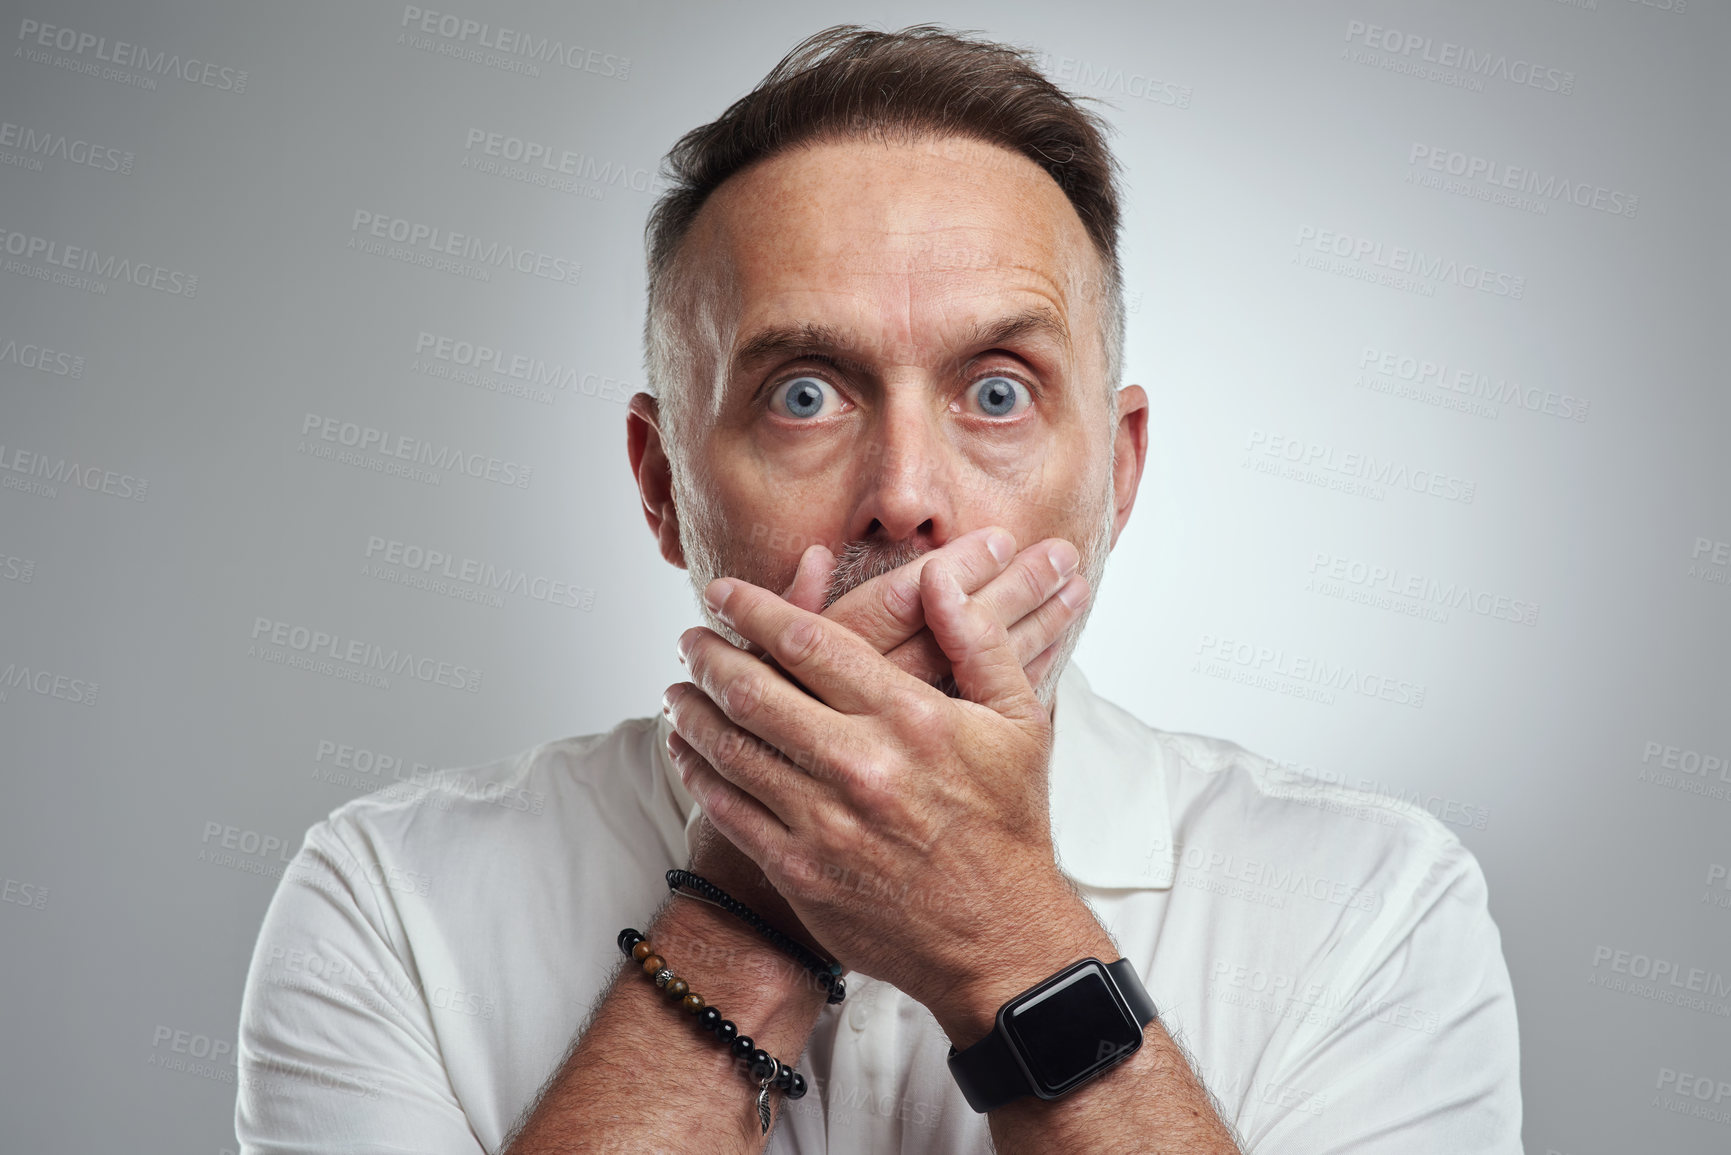 Buy stock photo Studio portrait of a mature man covering his mouth and looking shocked against a grey background